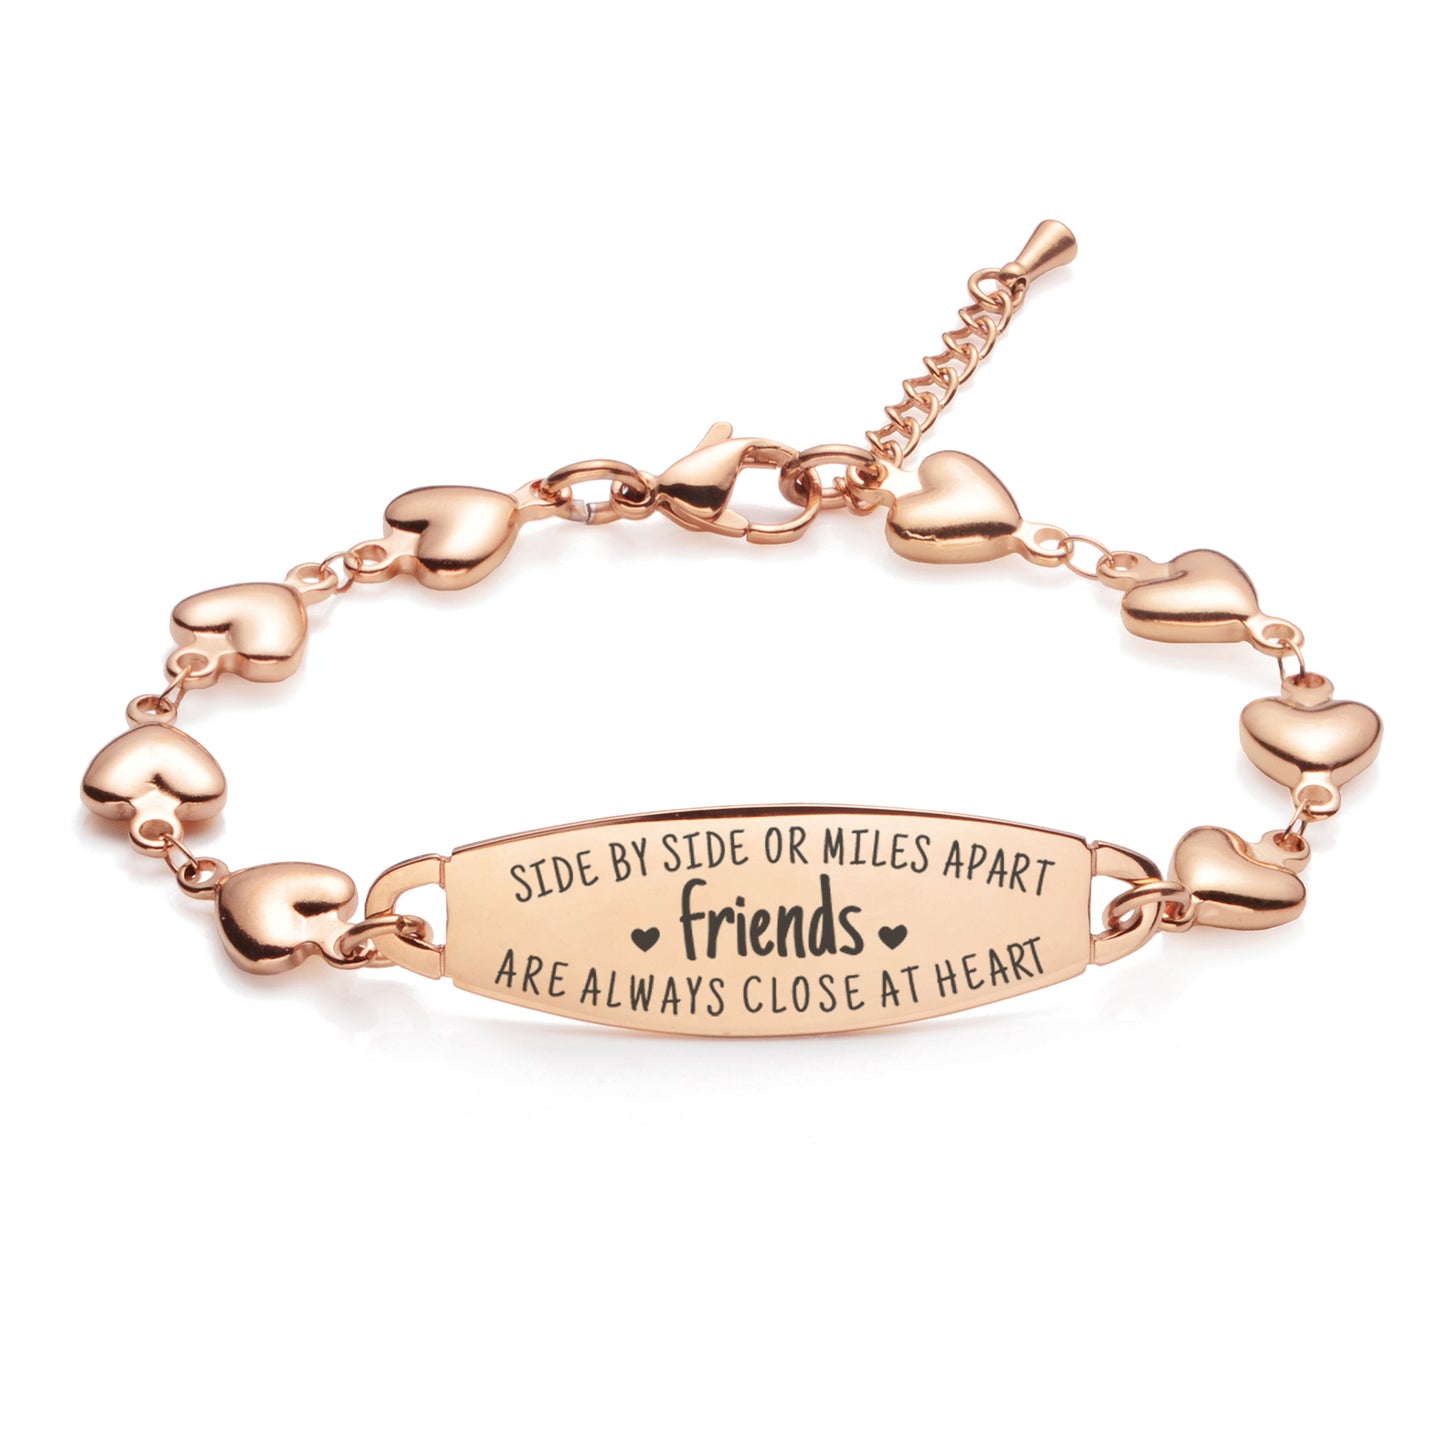 Heart friendship sister bracelets cute matching for best friends  -side by side or miles apart friends are always close at heart